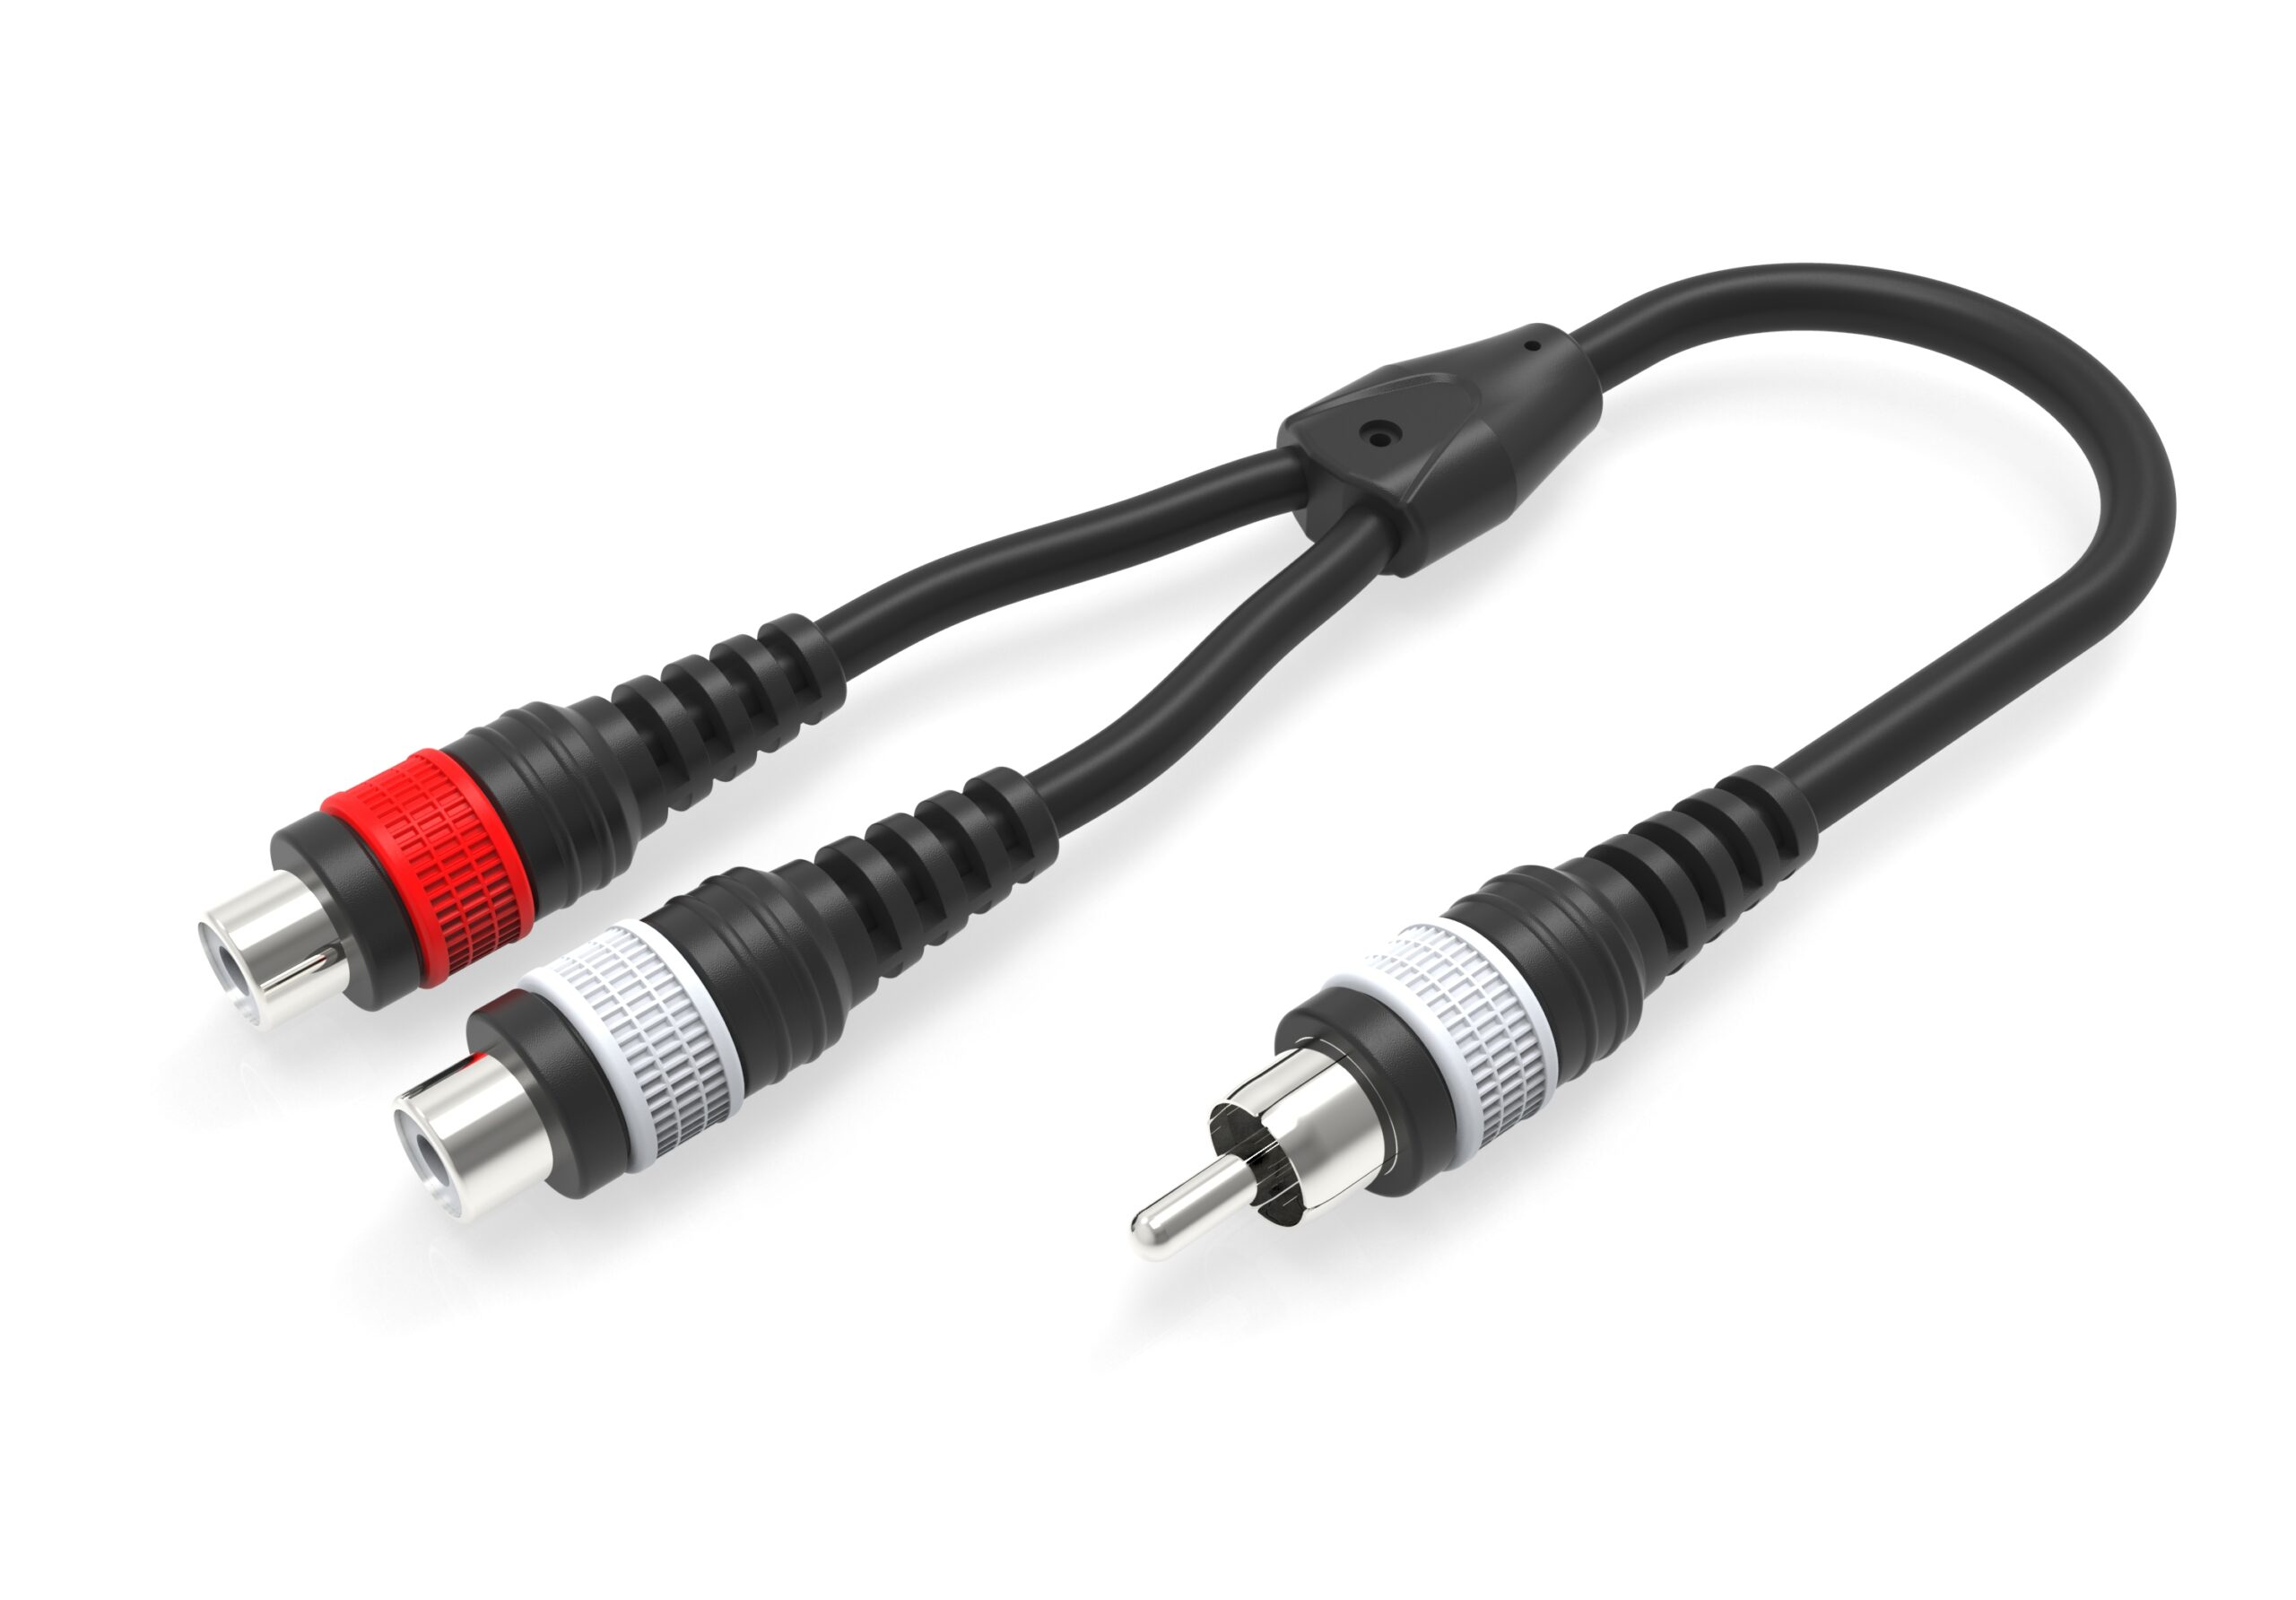 Xxx Pro Bep Com Mp3 - What Is an RCA Cable? - PropAudio